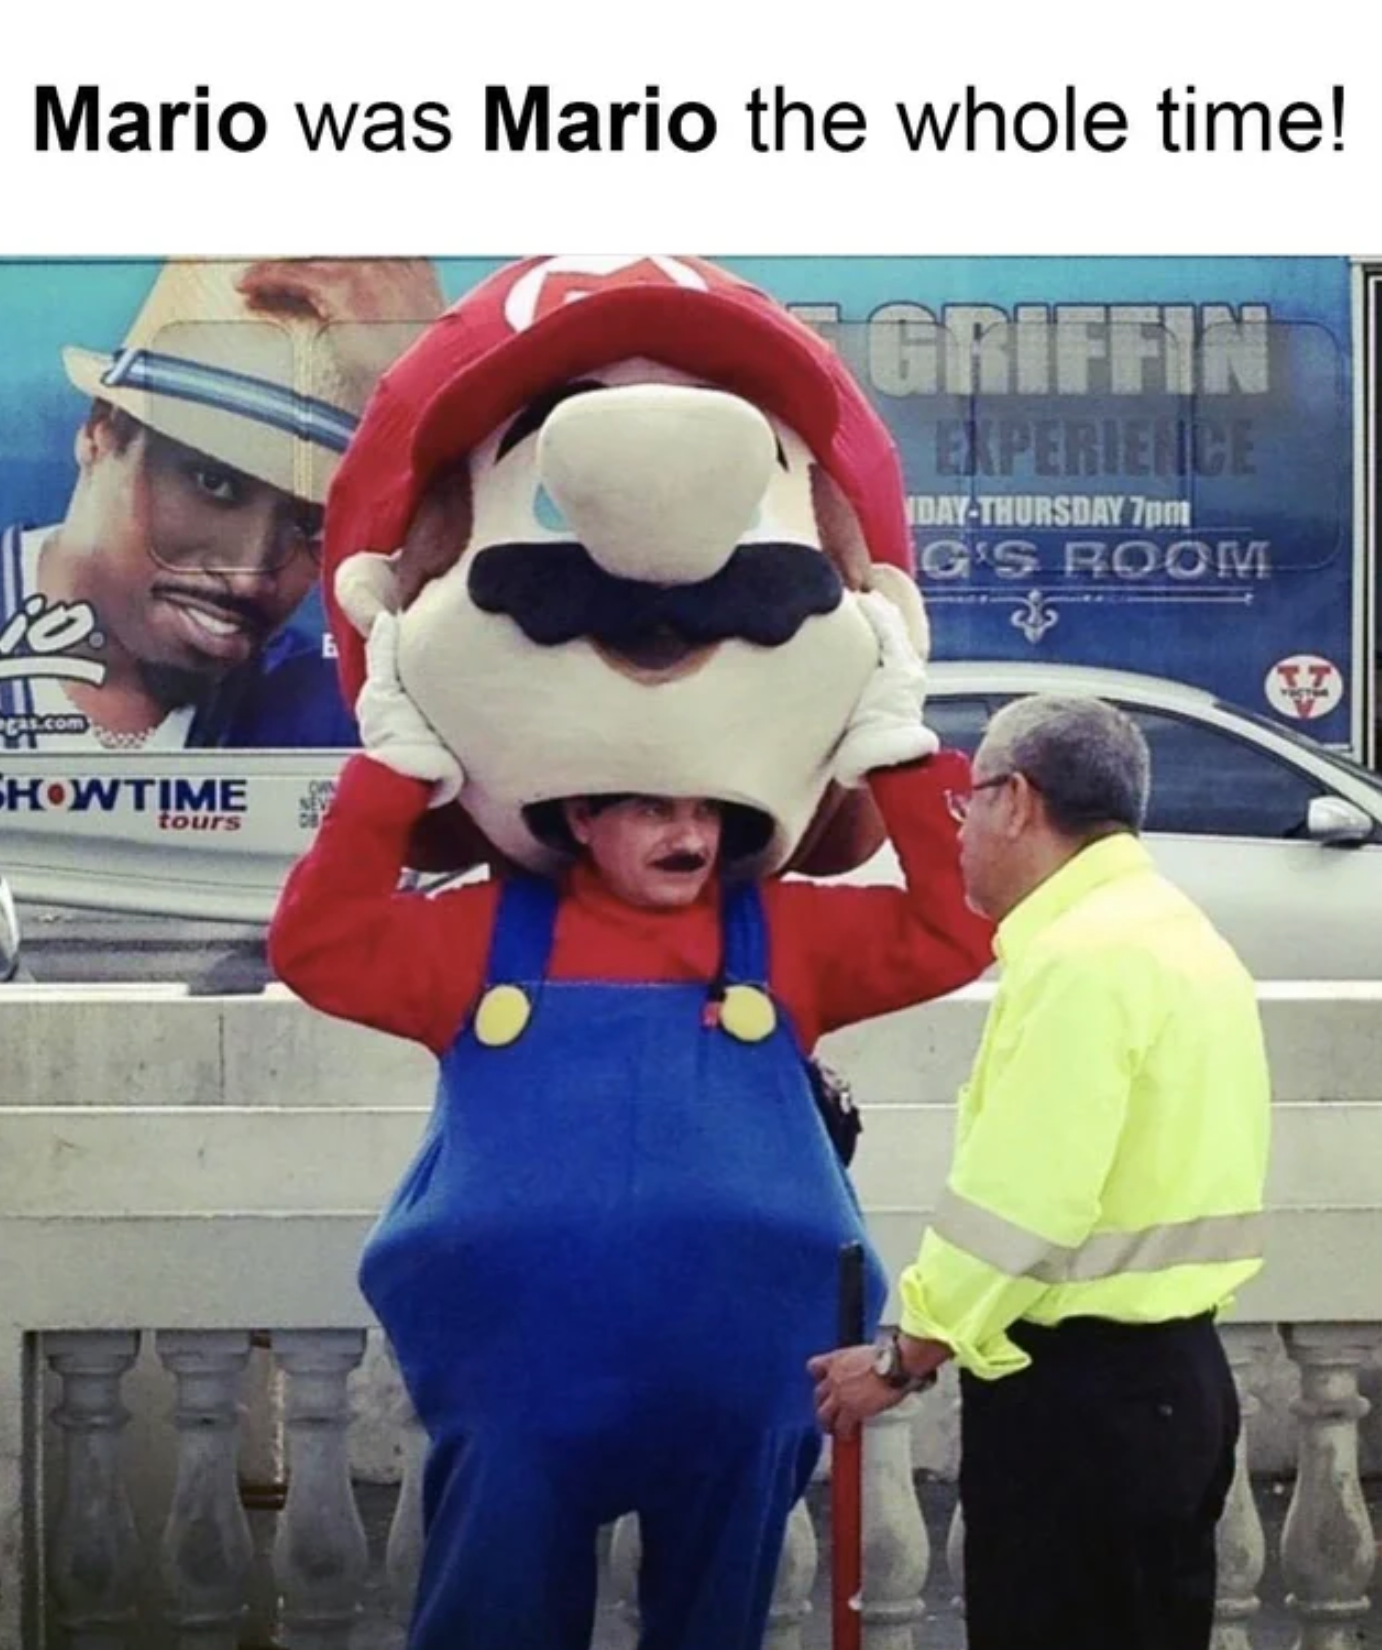 funny gaming memes  - mascot - Mario was Mario the whole time! Griffin Experience YdayThursday 7PM G'S Room Howtim tours